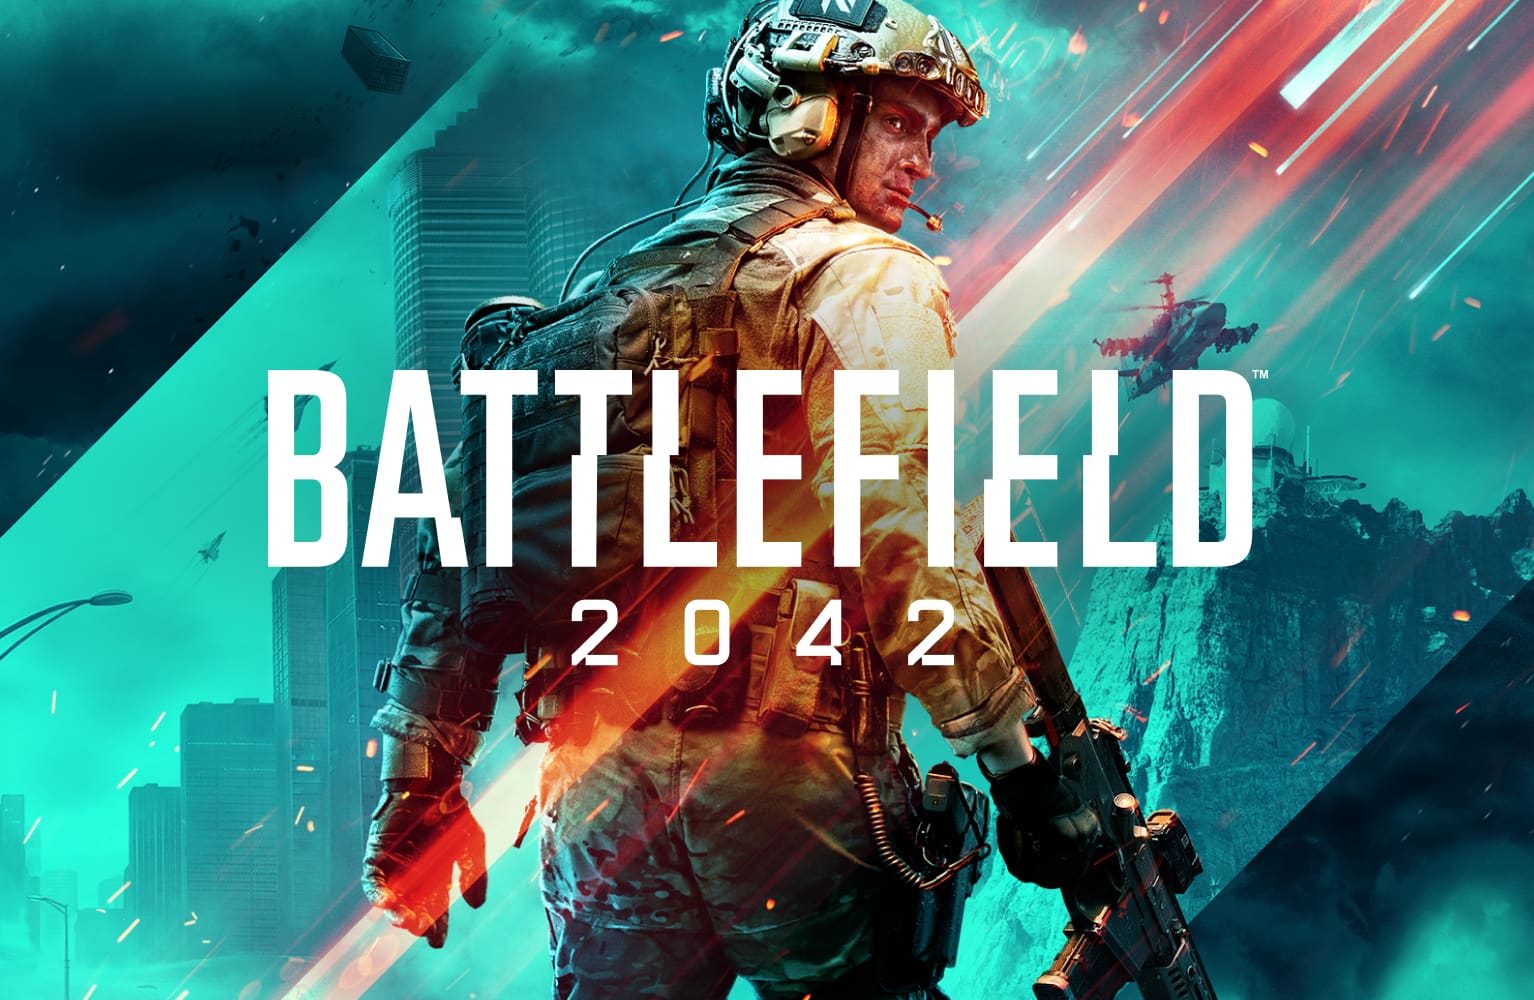 The latest Battlefield. It is just so far from what Battlefield should be.Uninstalled it and will continue playing V and BF1.-u/SSPeteCarroll